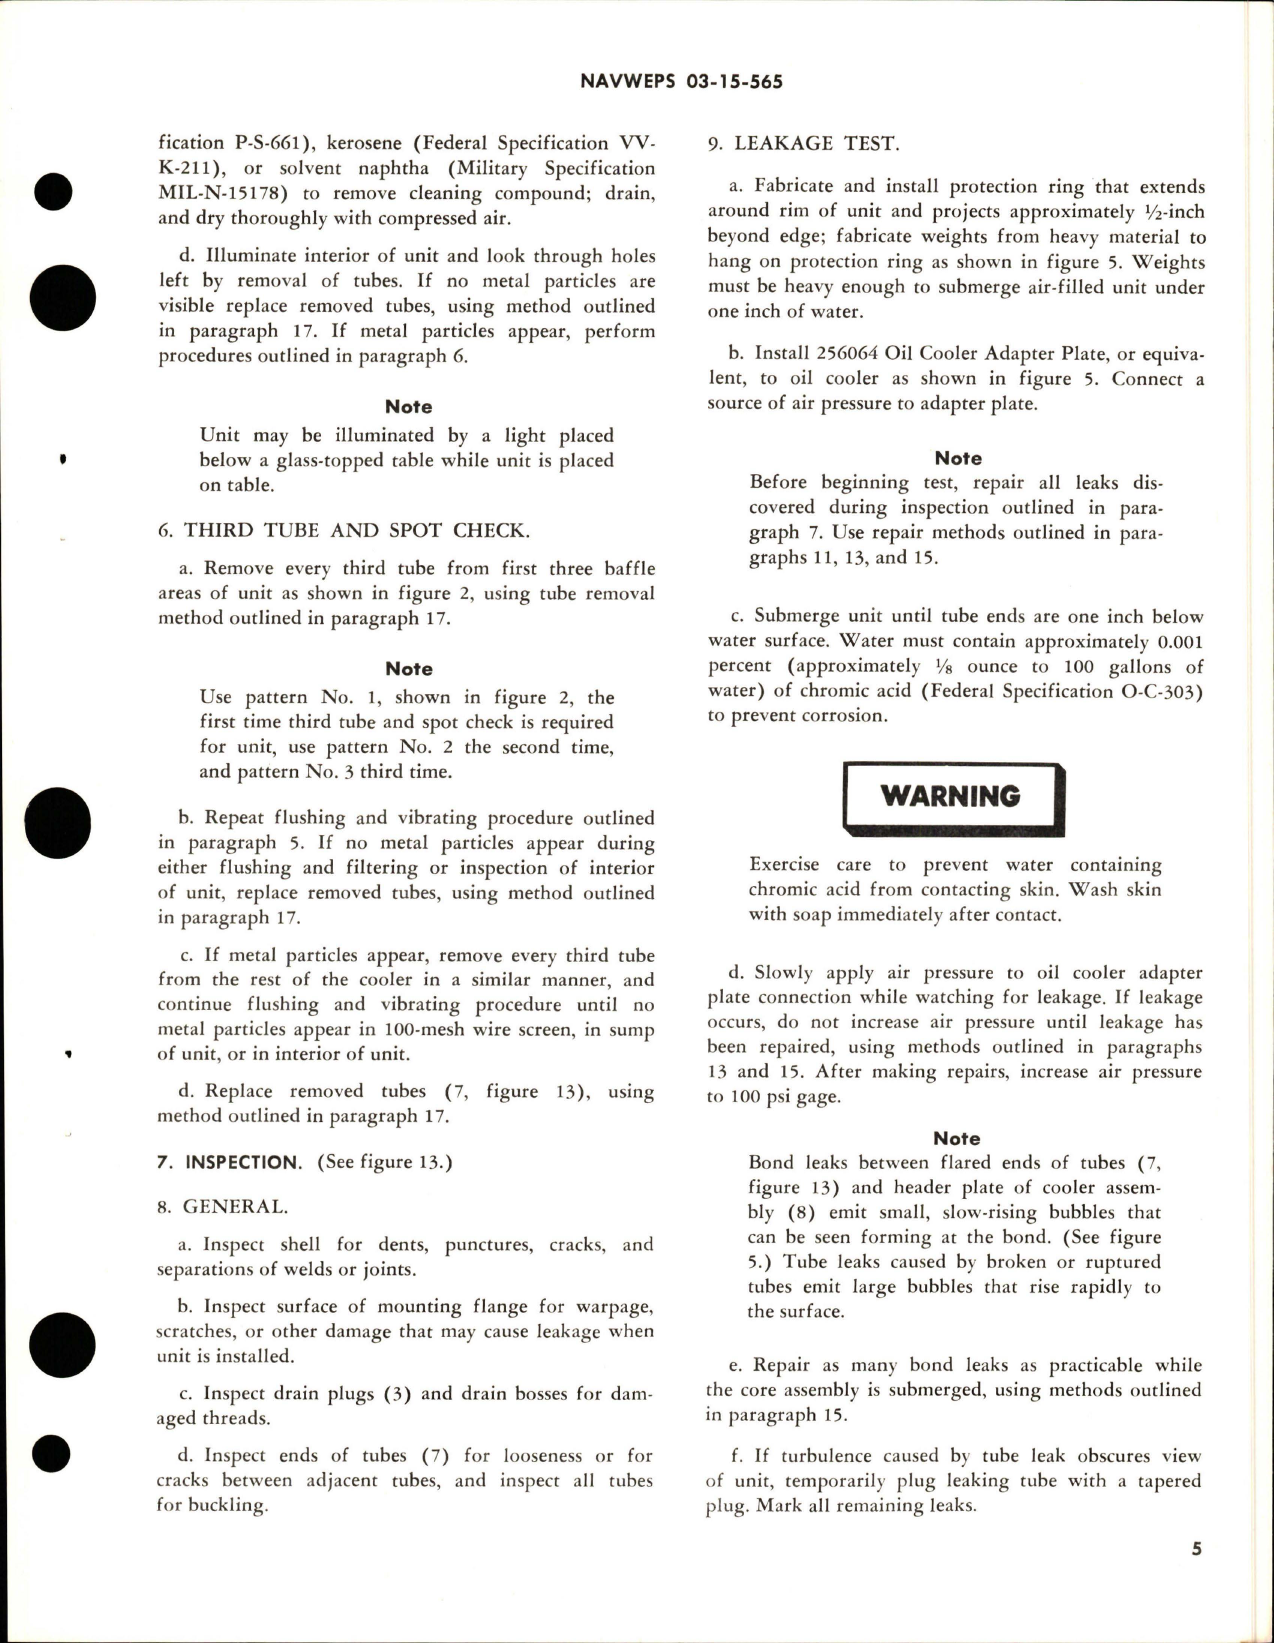 Sample page 7 from AirCorps Library document: Overhaul Instructions with Parts Breakdown for Elliptical Aluminum Oil Coolers - Parts 86354 and 86354-7 